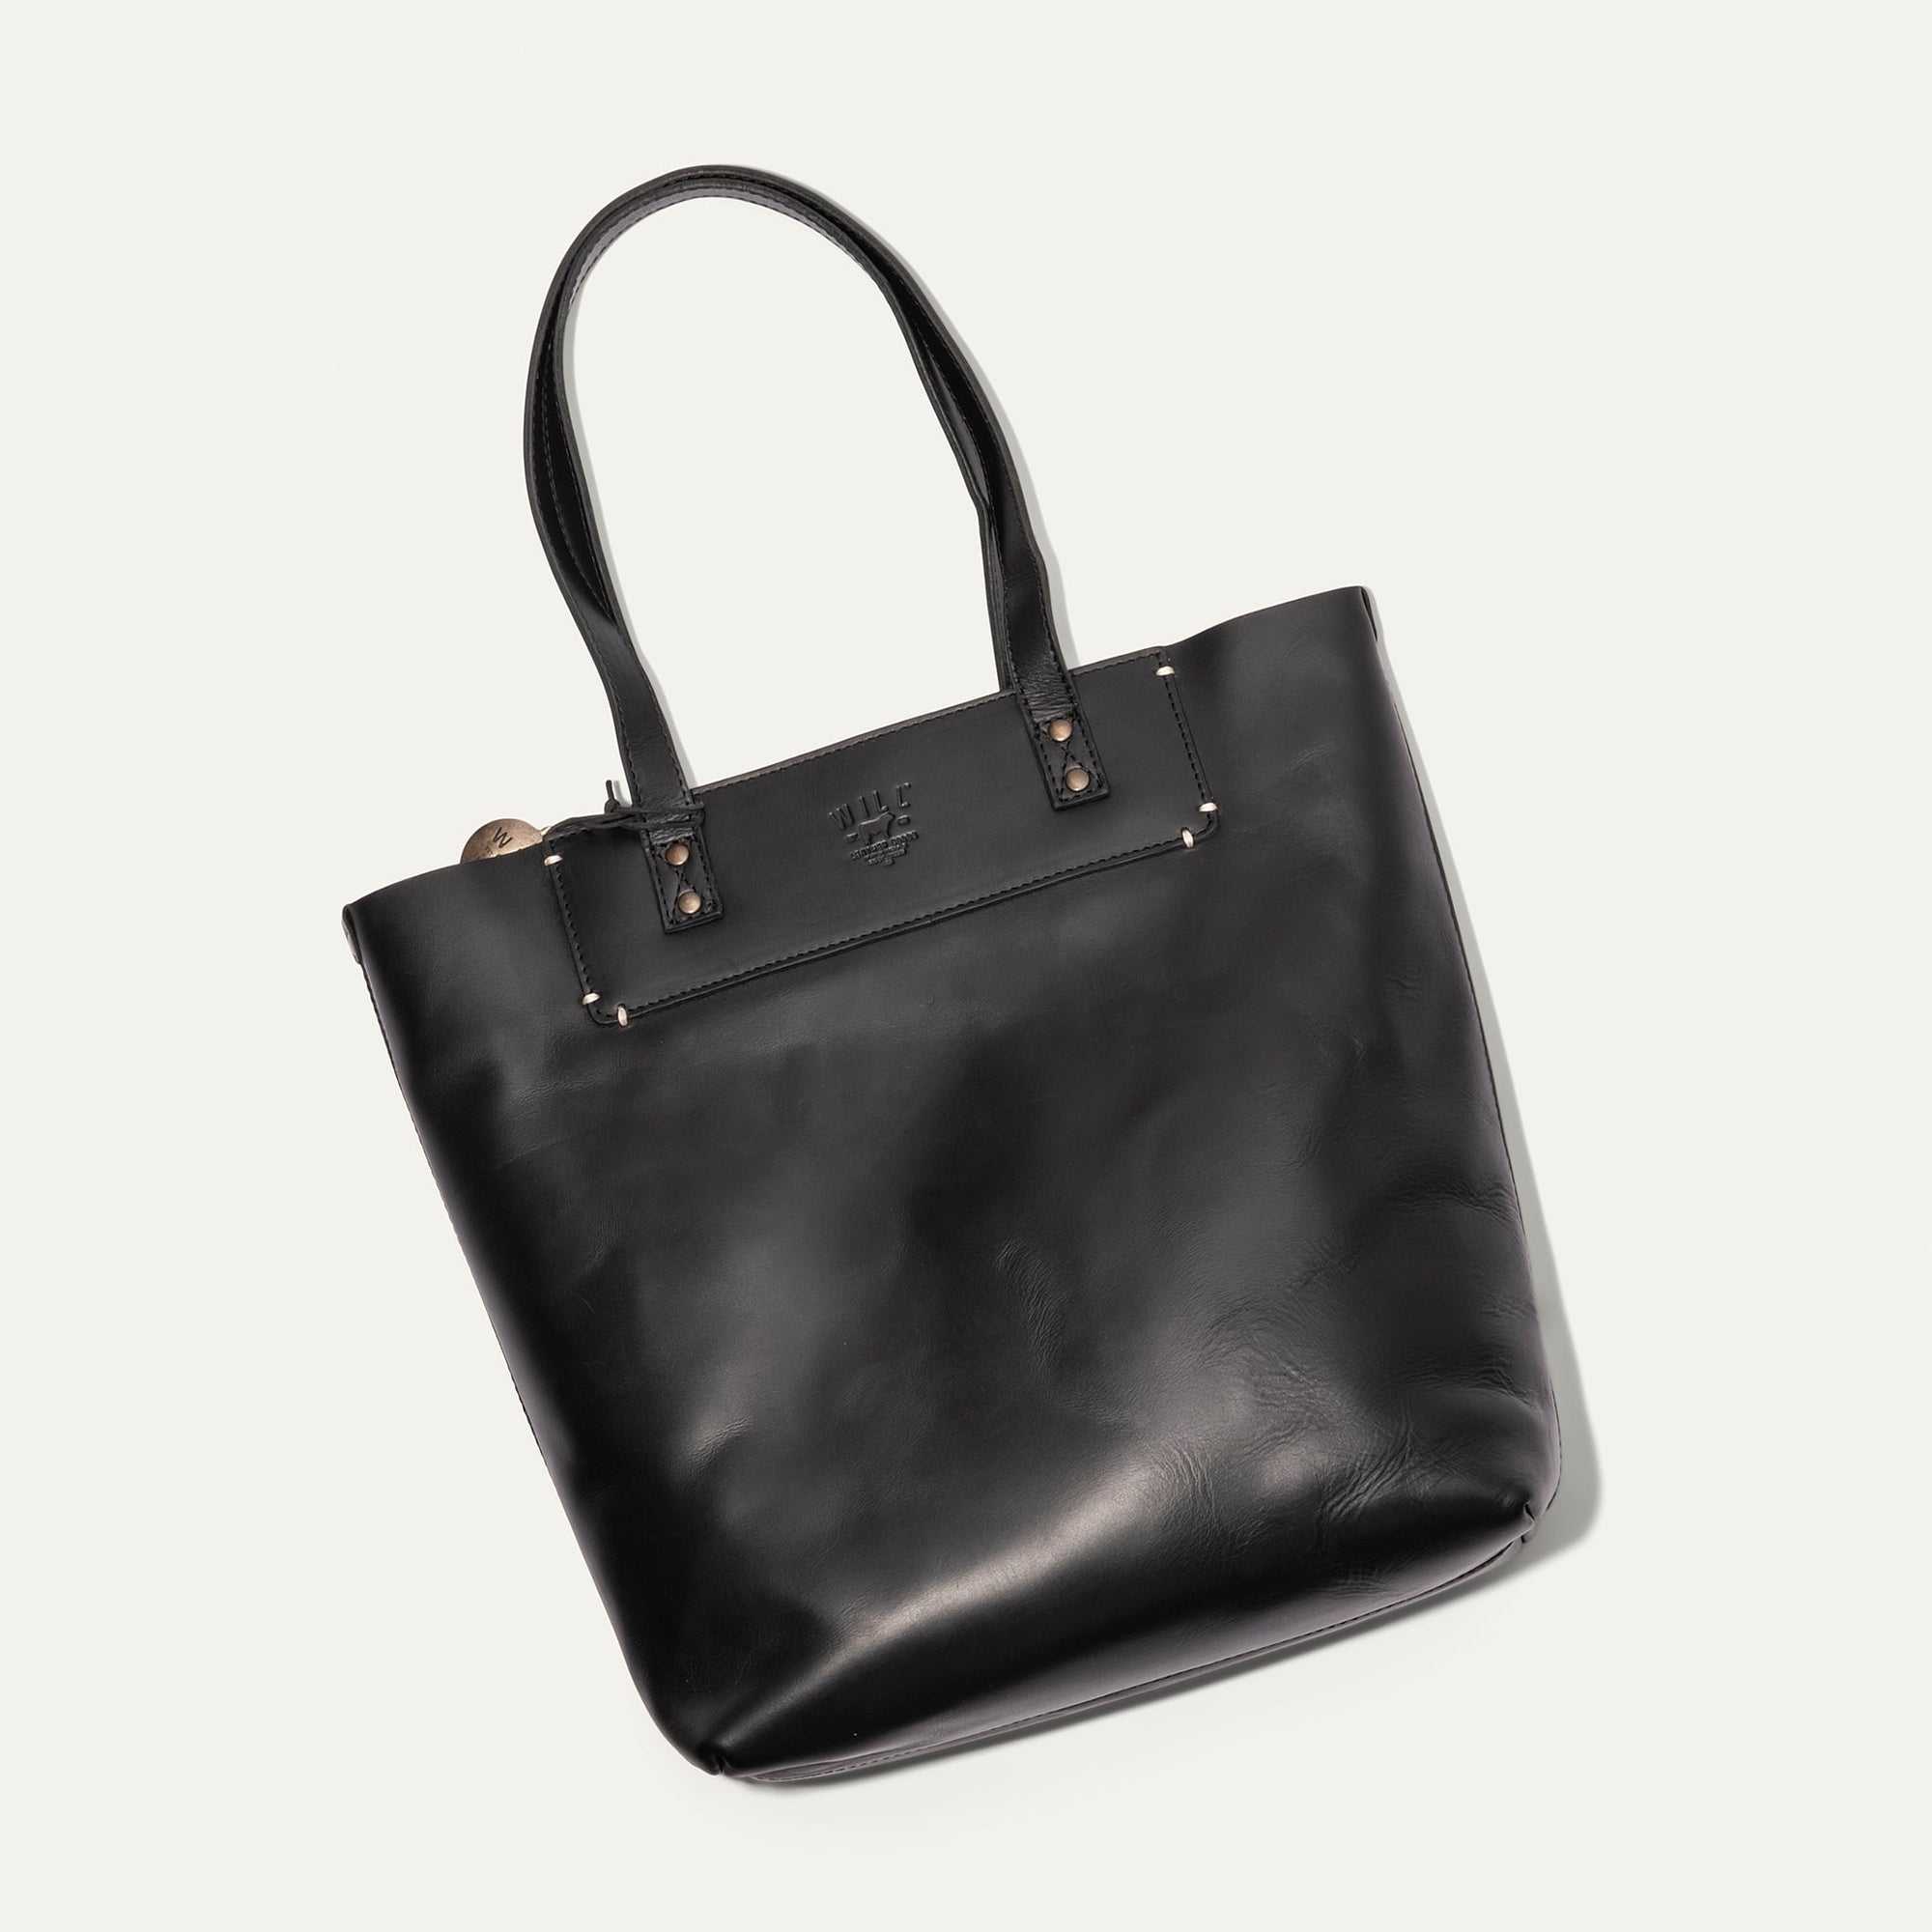 Simple Tote in Black by Will Leather Goods